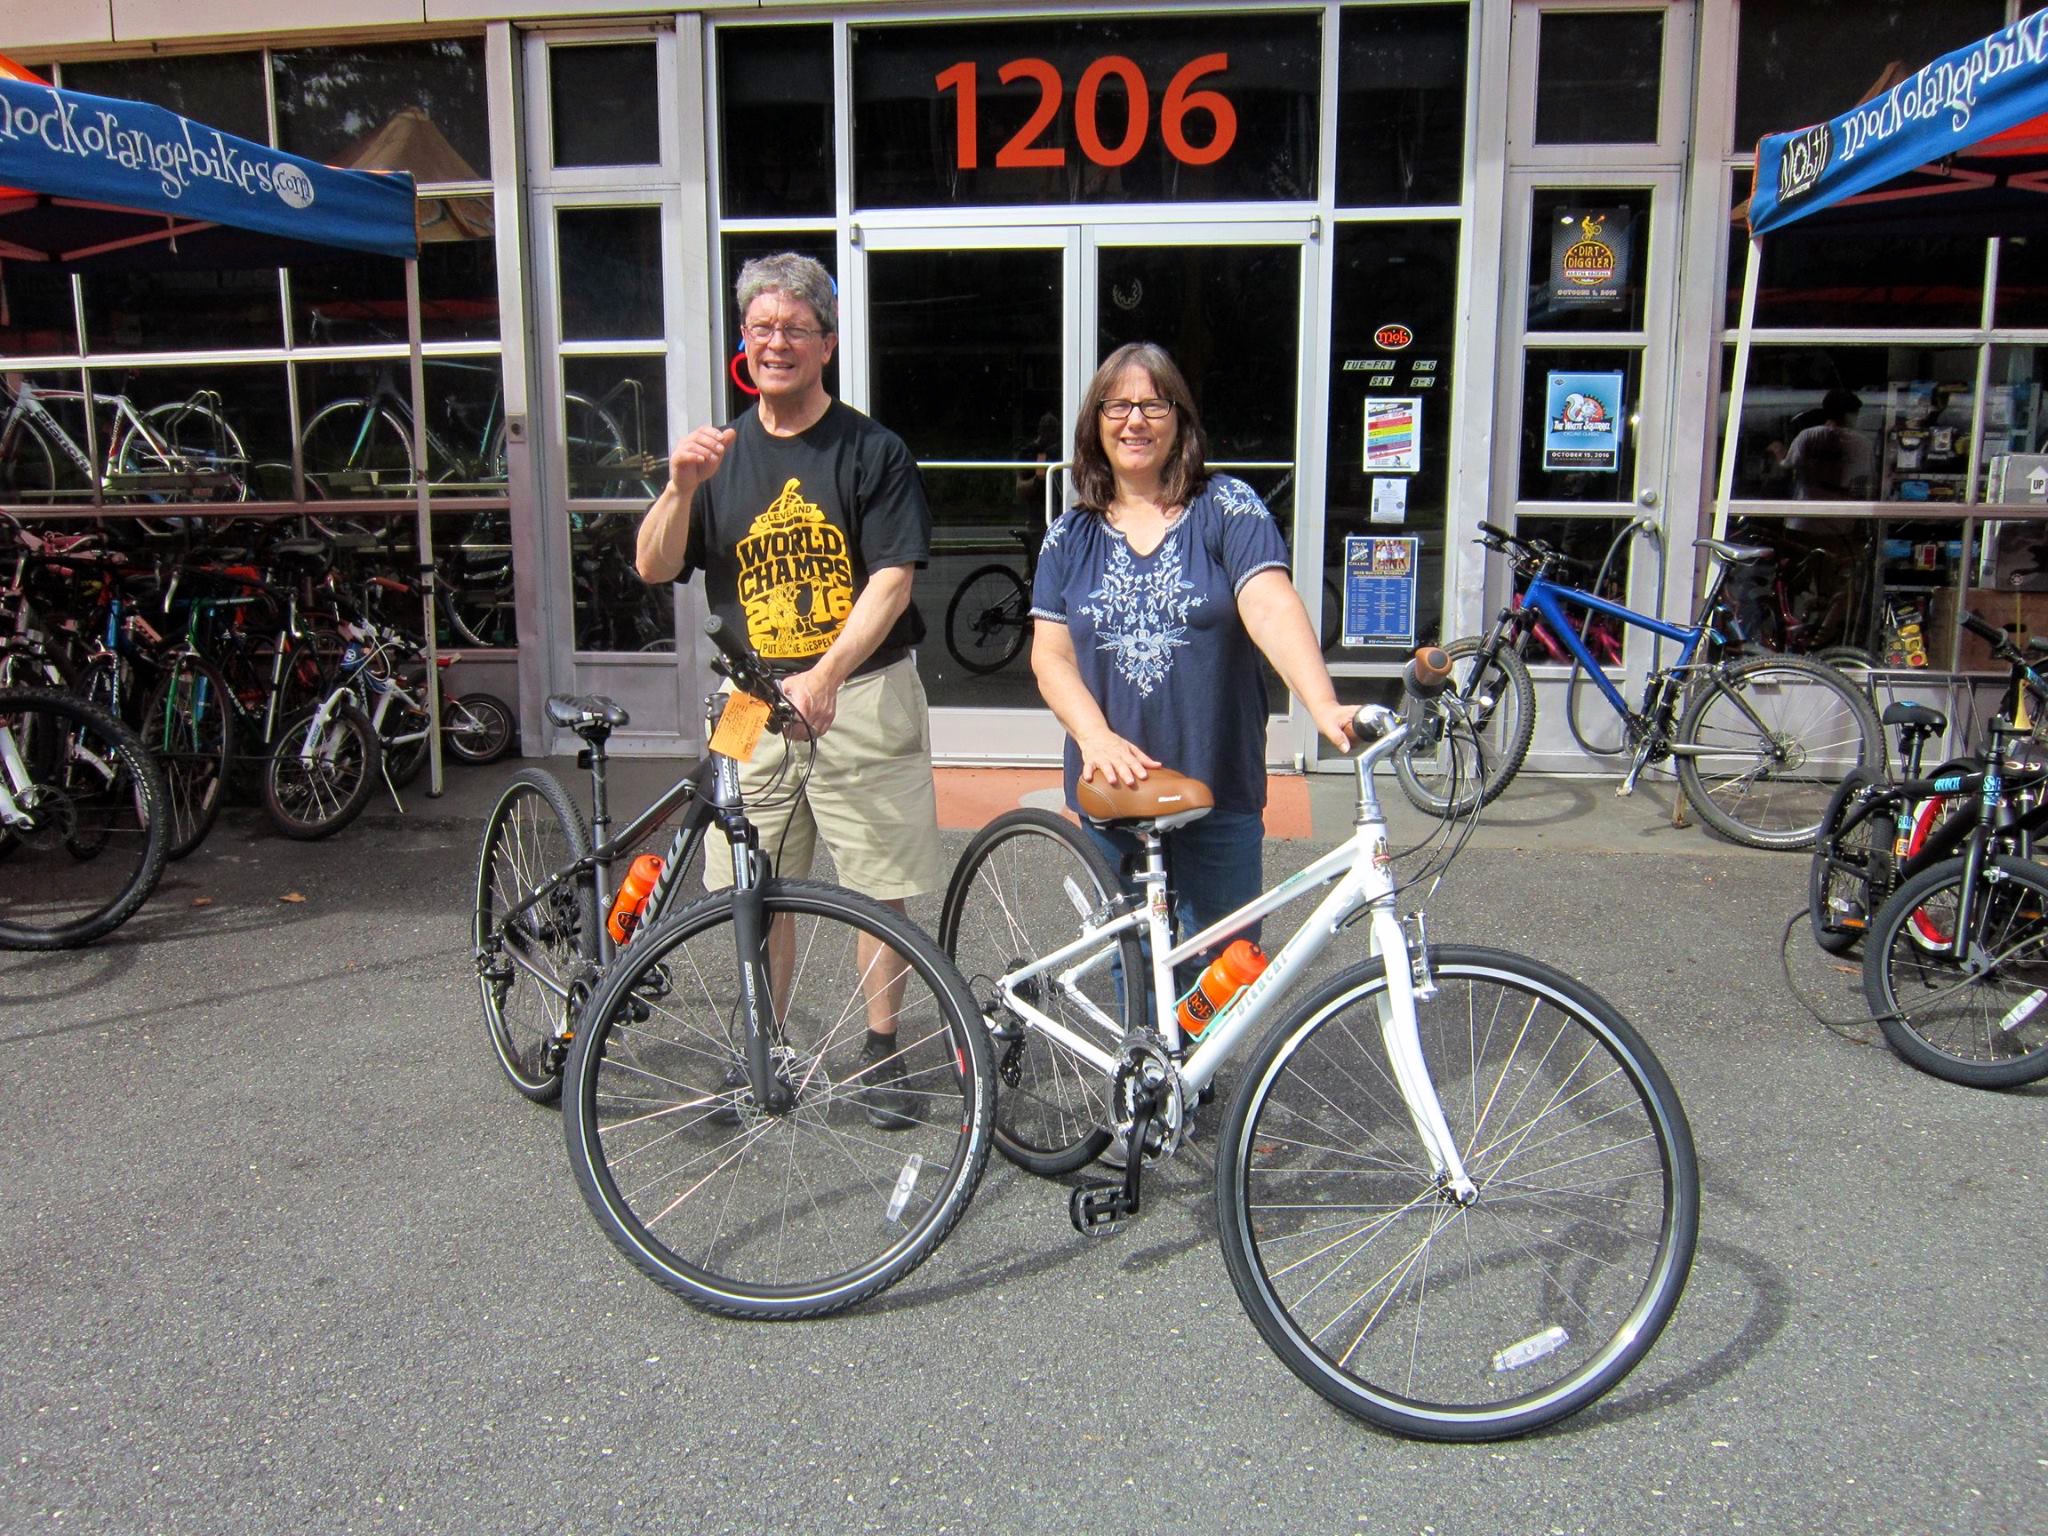 Mike with his new Kona Splice and Cindy with her new Bianchi Cortina. They bought their new bicycles at a great time of the year for cycling adventures. Looking Good!